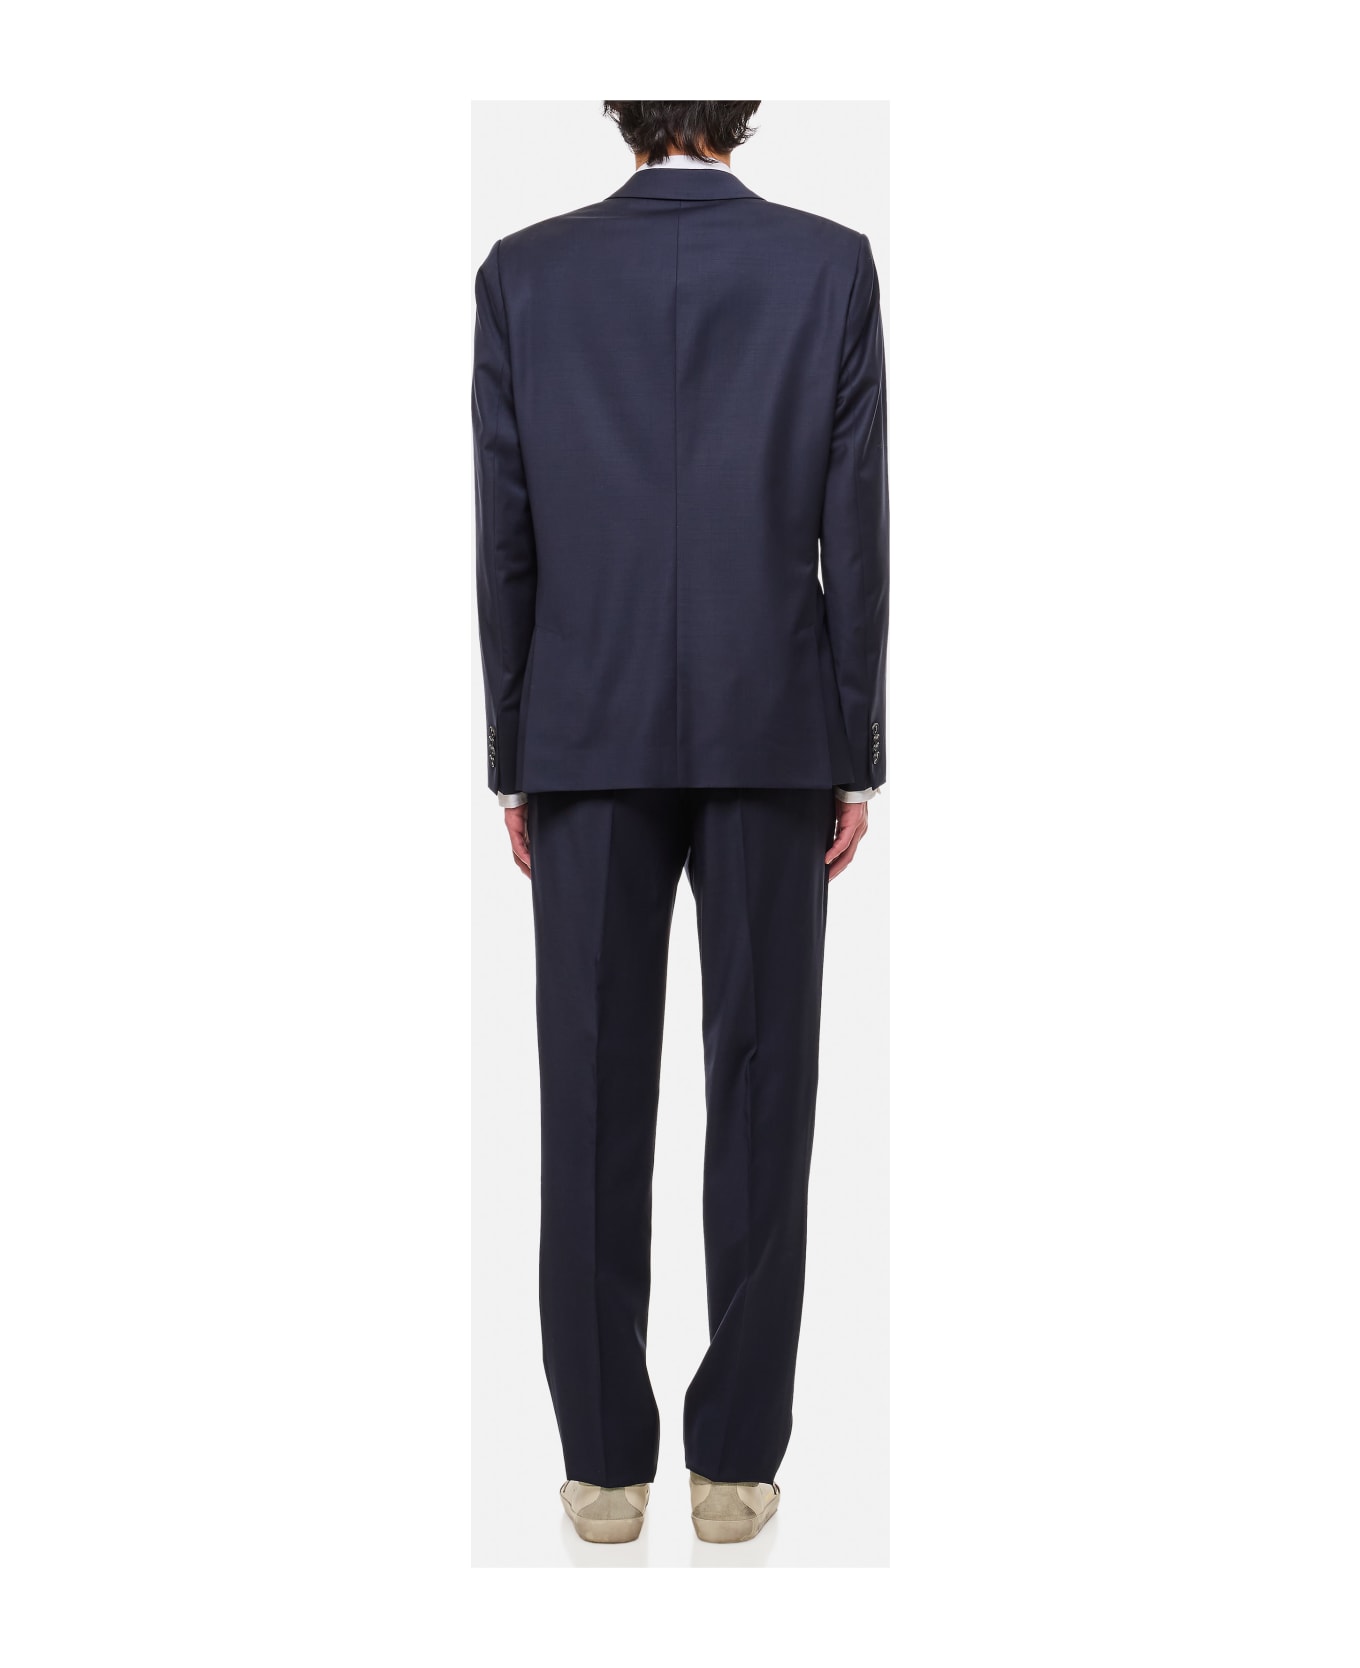 Paul Smith Tailored Fit Jacket - Blue スーツ